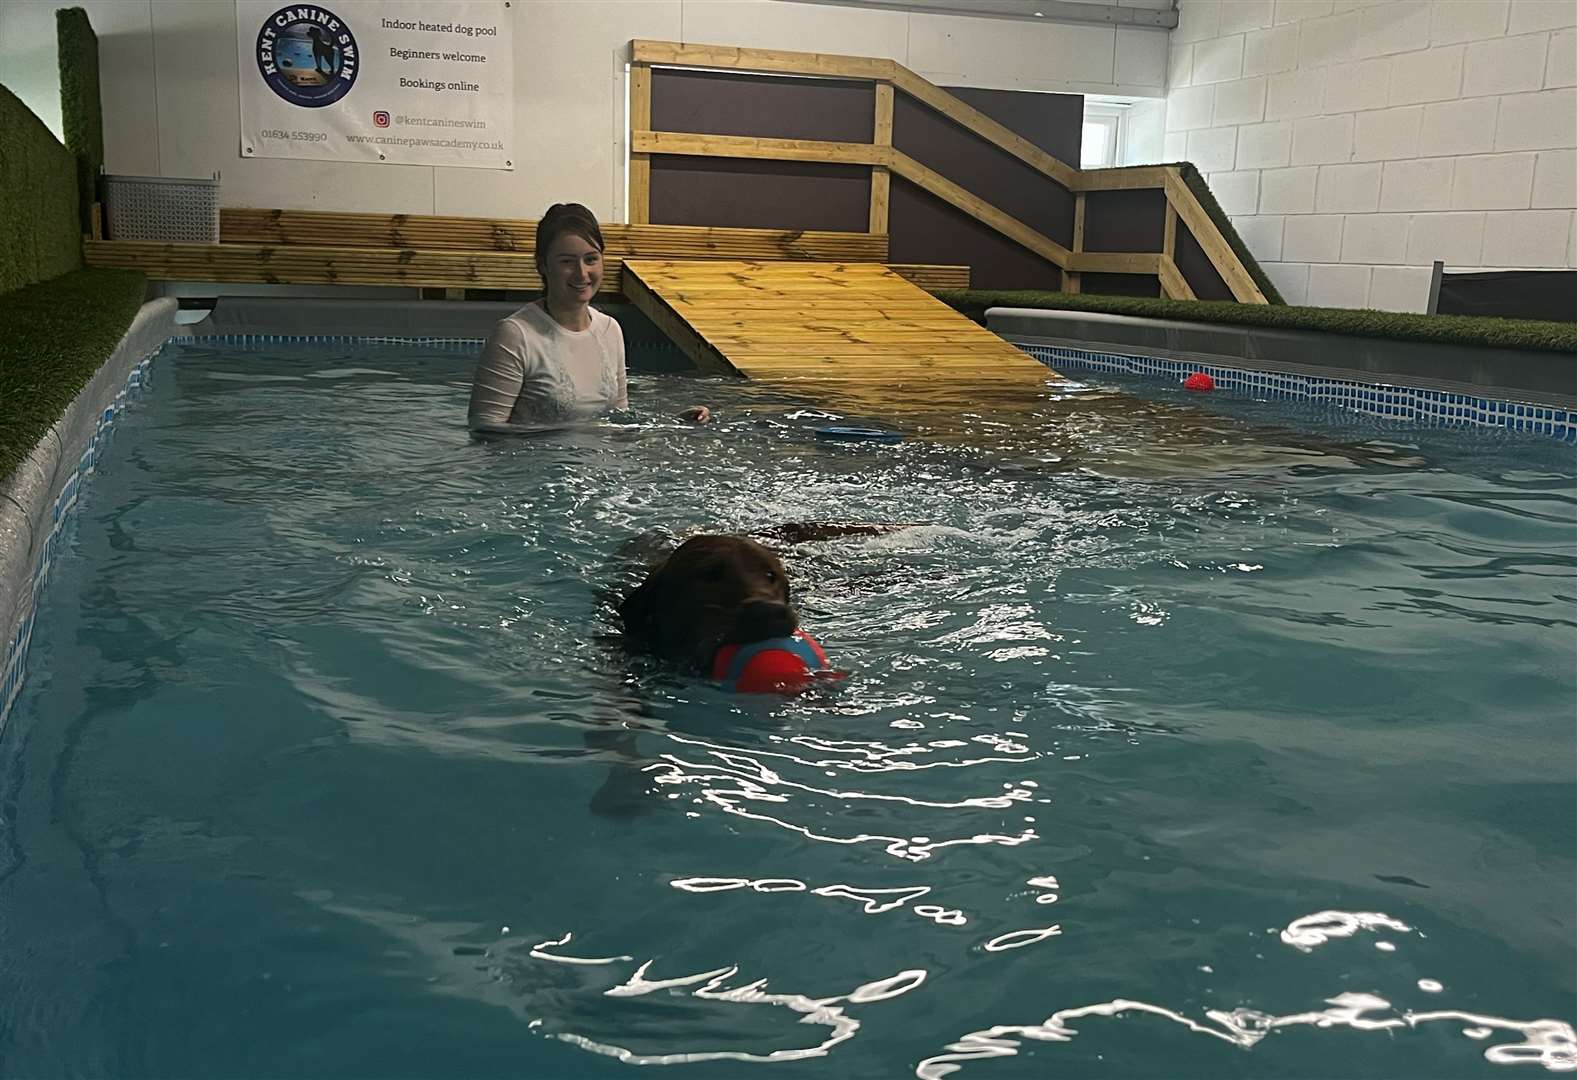 One-year-old Cooper loves swimming in the indoor heated pool at Canine Paws Academy at Mockbeggar Business Park in Cliffe